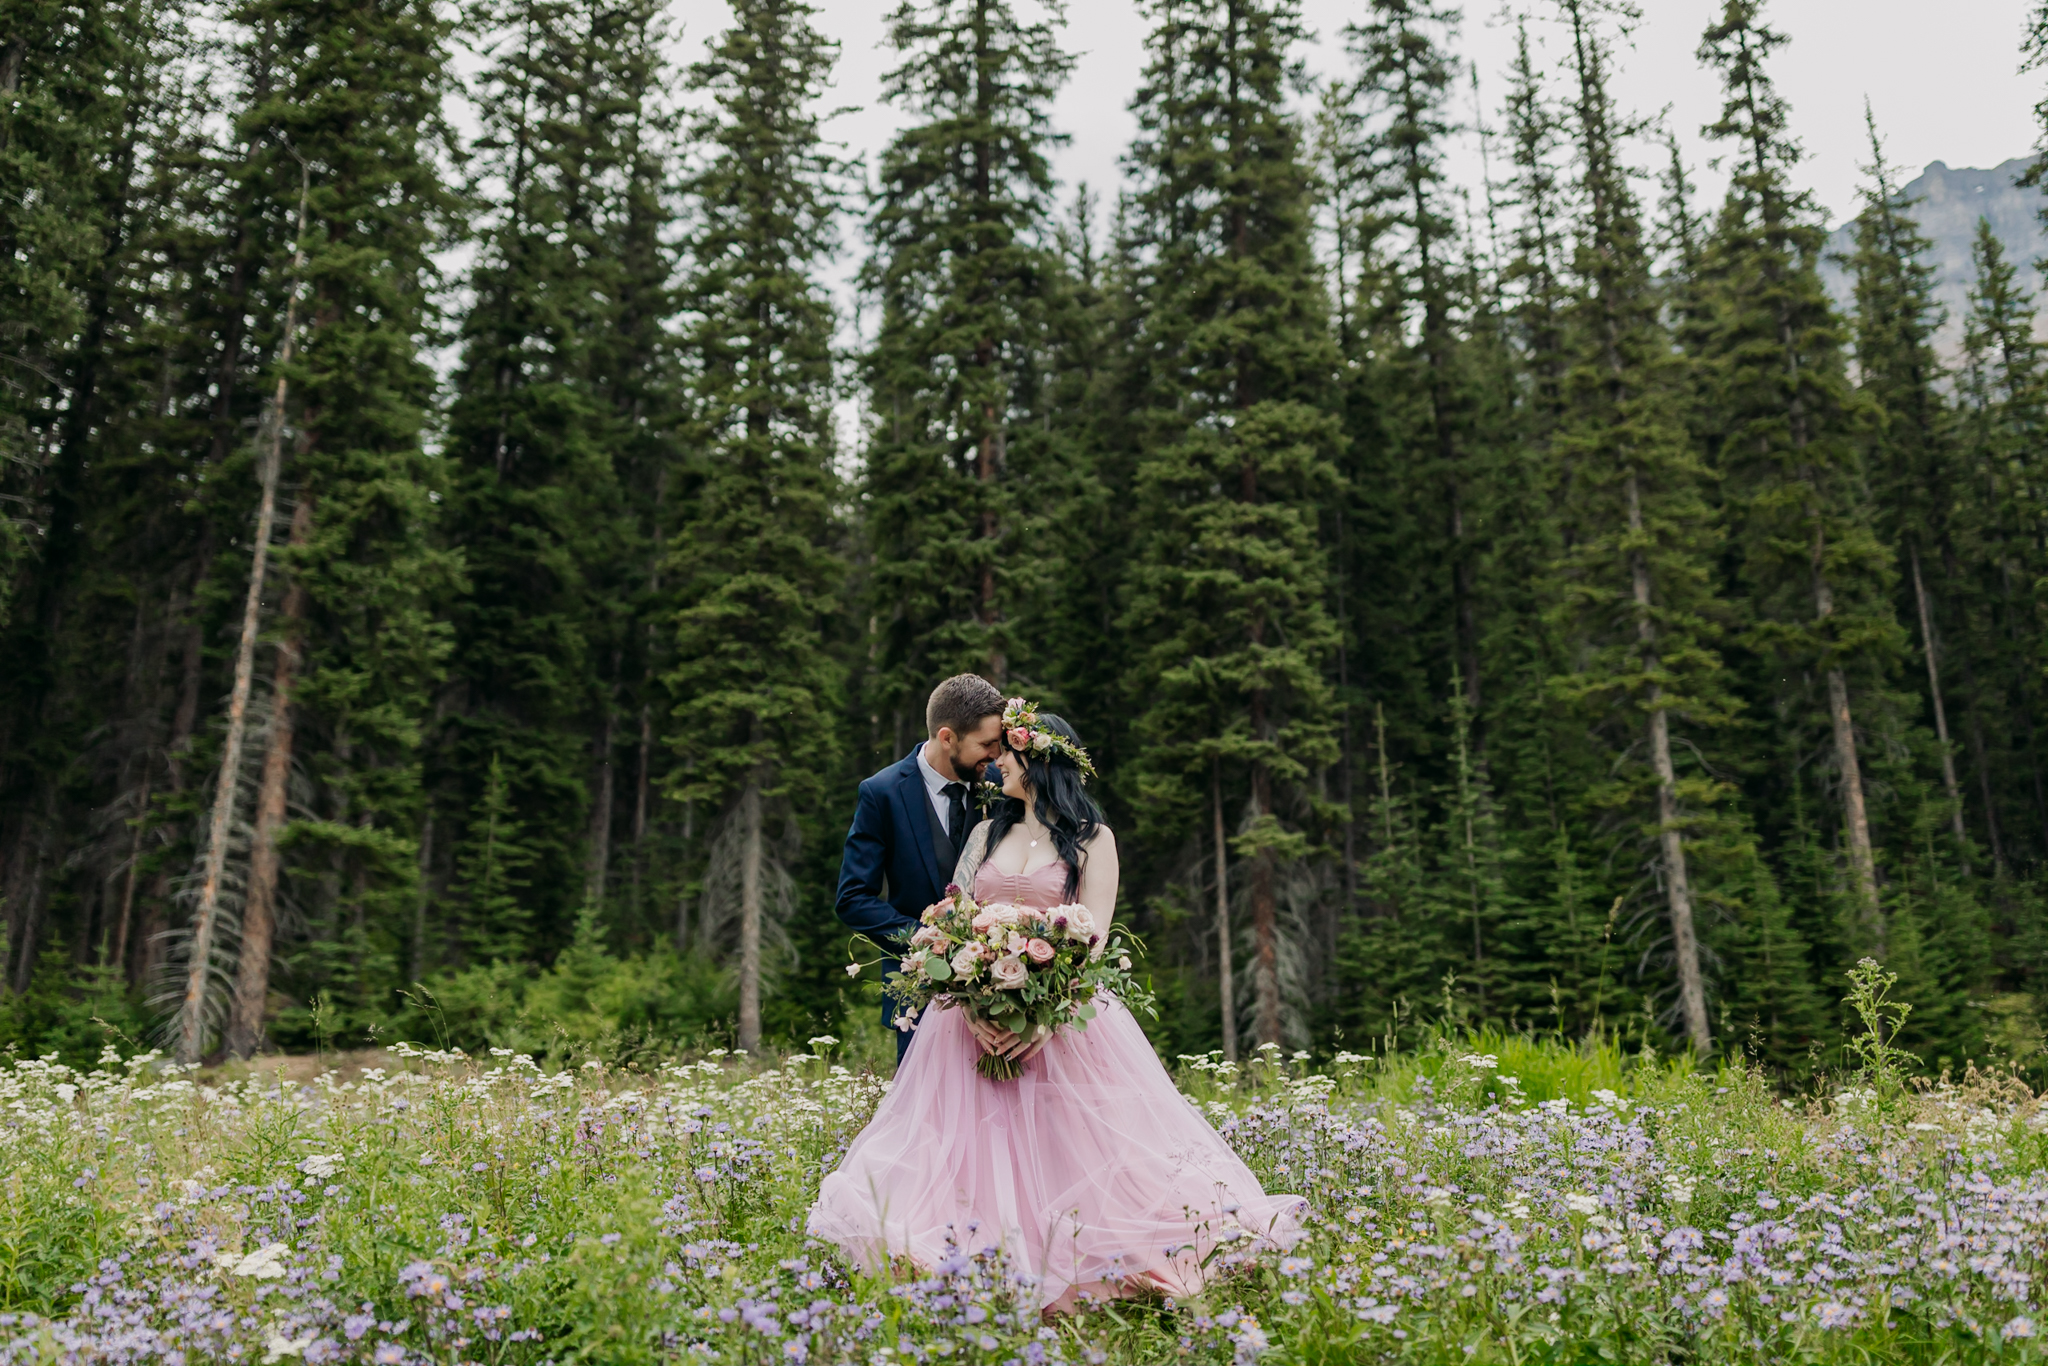 A Guide to Eloping in the Canadian Rockies | Mountain Wedding photographed by ENV Photography | woodland forest wedding at Moraine Lake in the trees. Bride in vintage pink gown & floral crown. Boho mountain wedding.